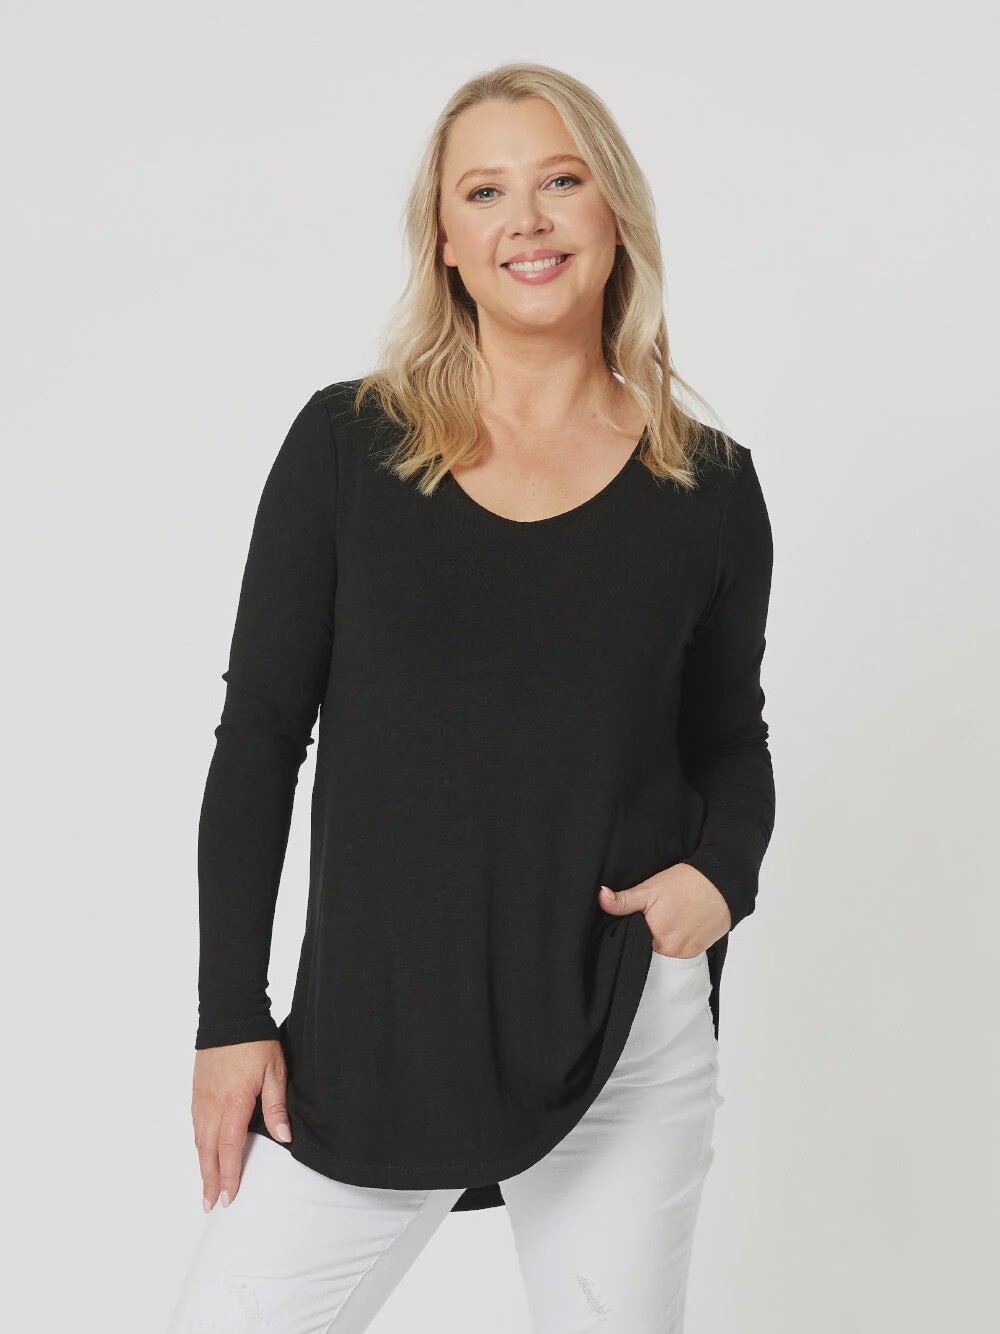 Clarity - Keely Long Sleeve Top Black - 44425, Size: 8